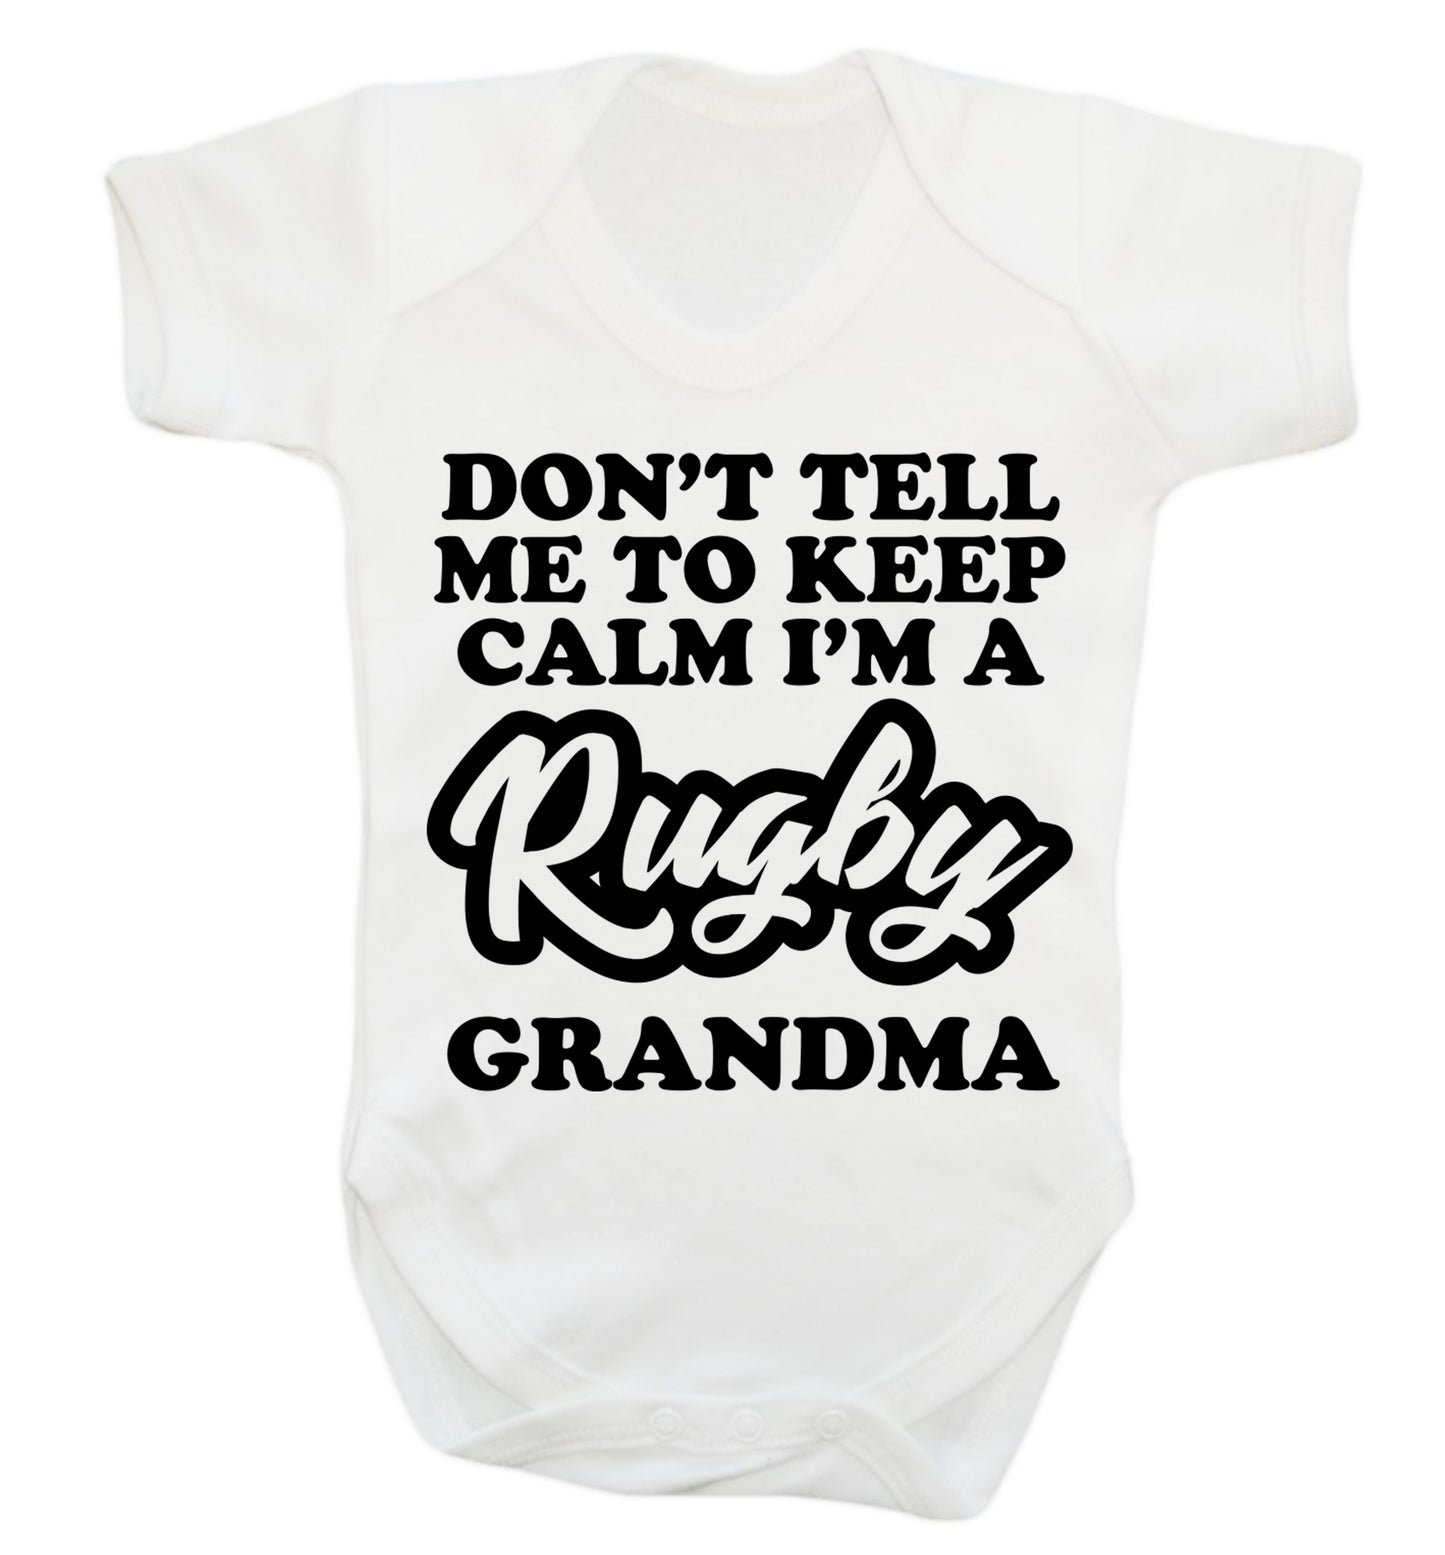 Don't tell me to keep calm I'm a rugby grandma Baby Vest white 18-24 months